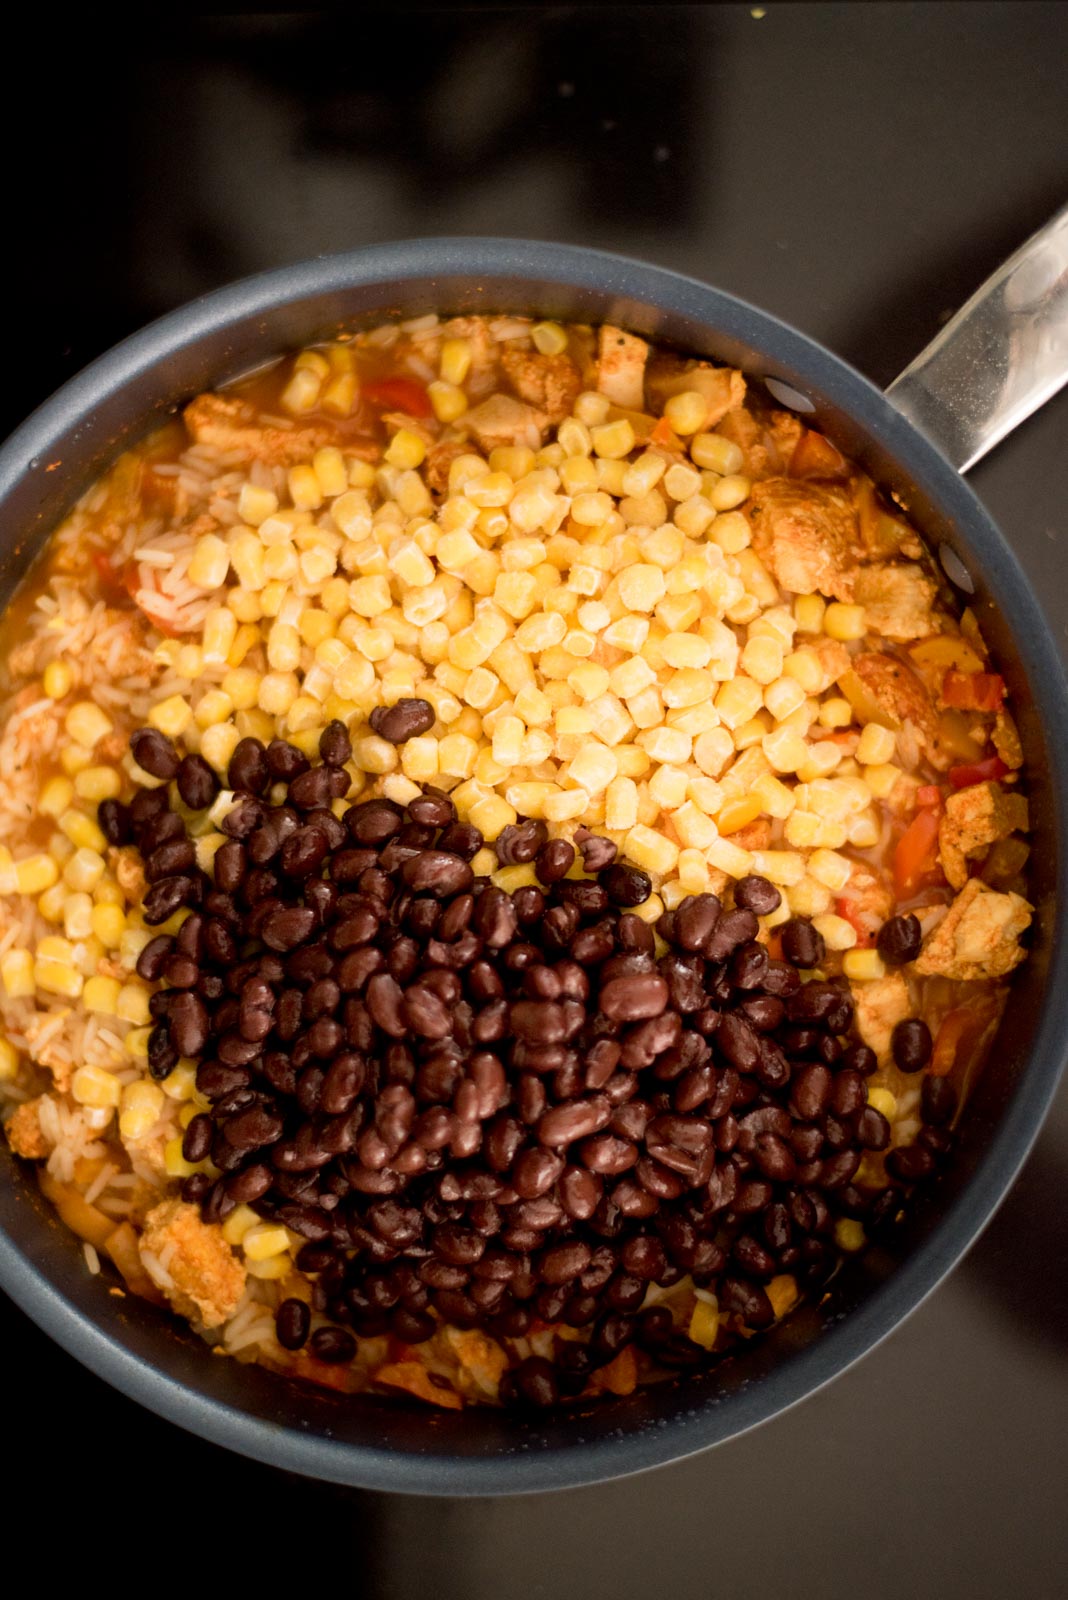 corn and black beans added to the skillet with the cooked chicken, bell peppers, and rice on the stove